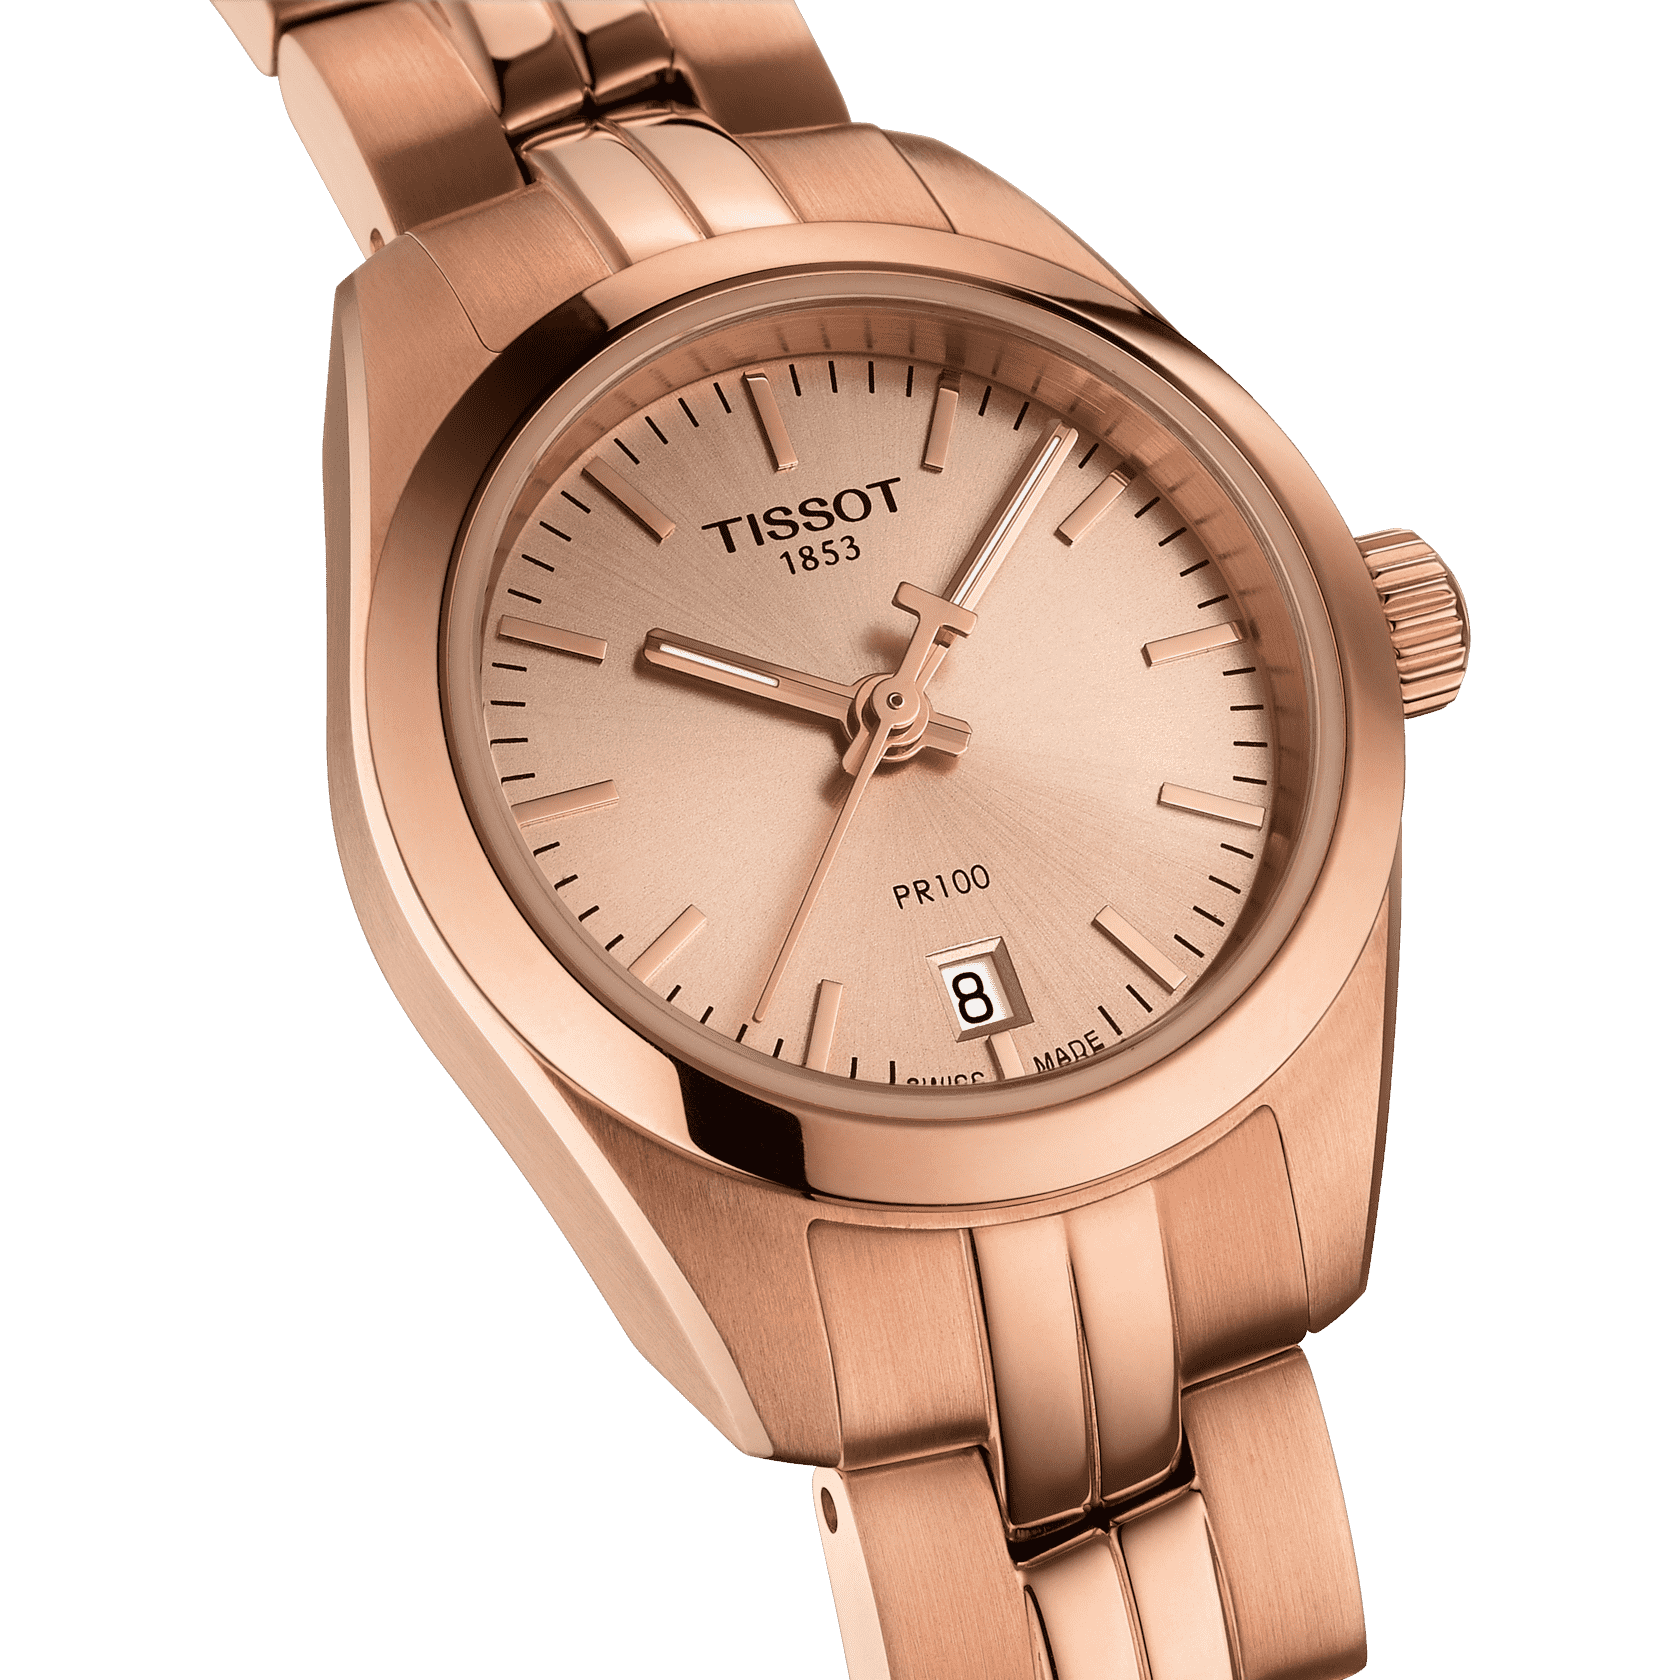 Trusted Replica Watch Sites Price